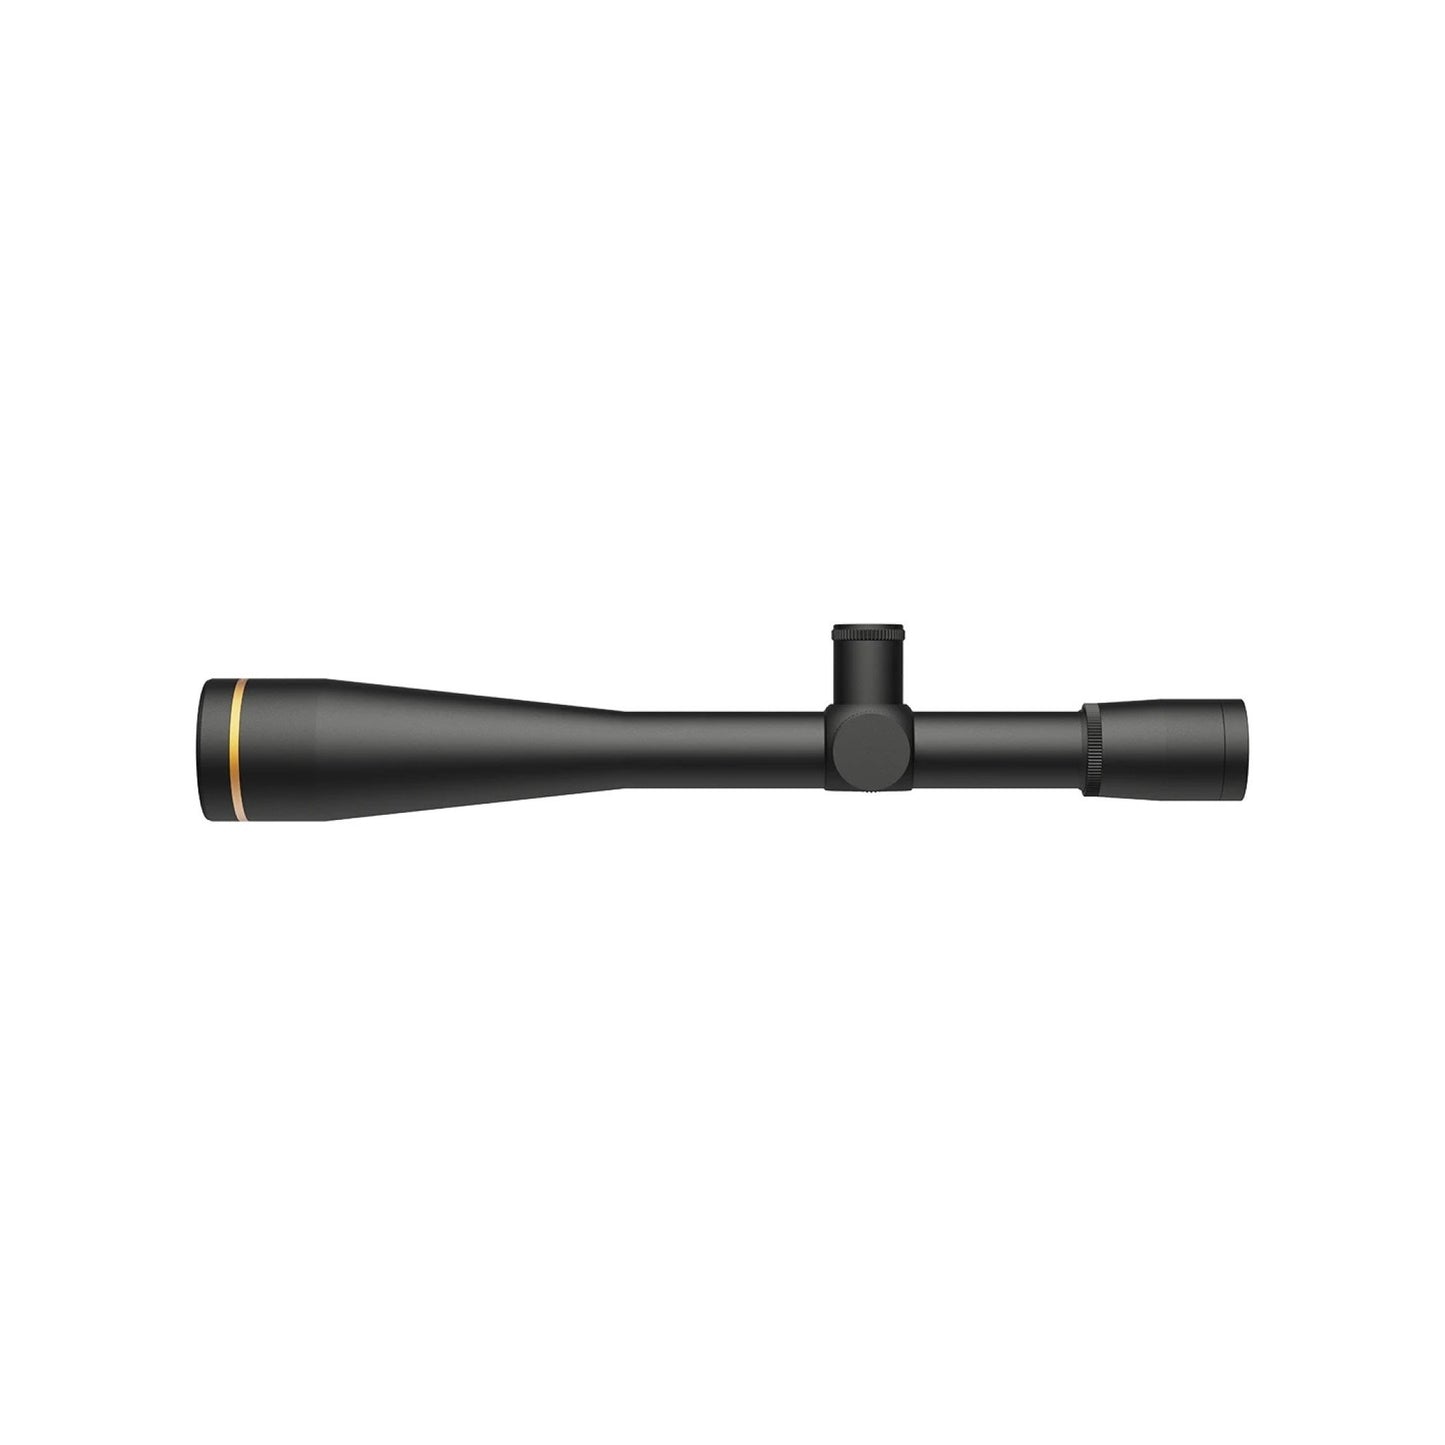 Leupold Competition Series Rifle Scope 45X45mm 1/8 MIN. Target Dot Reticle